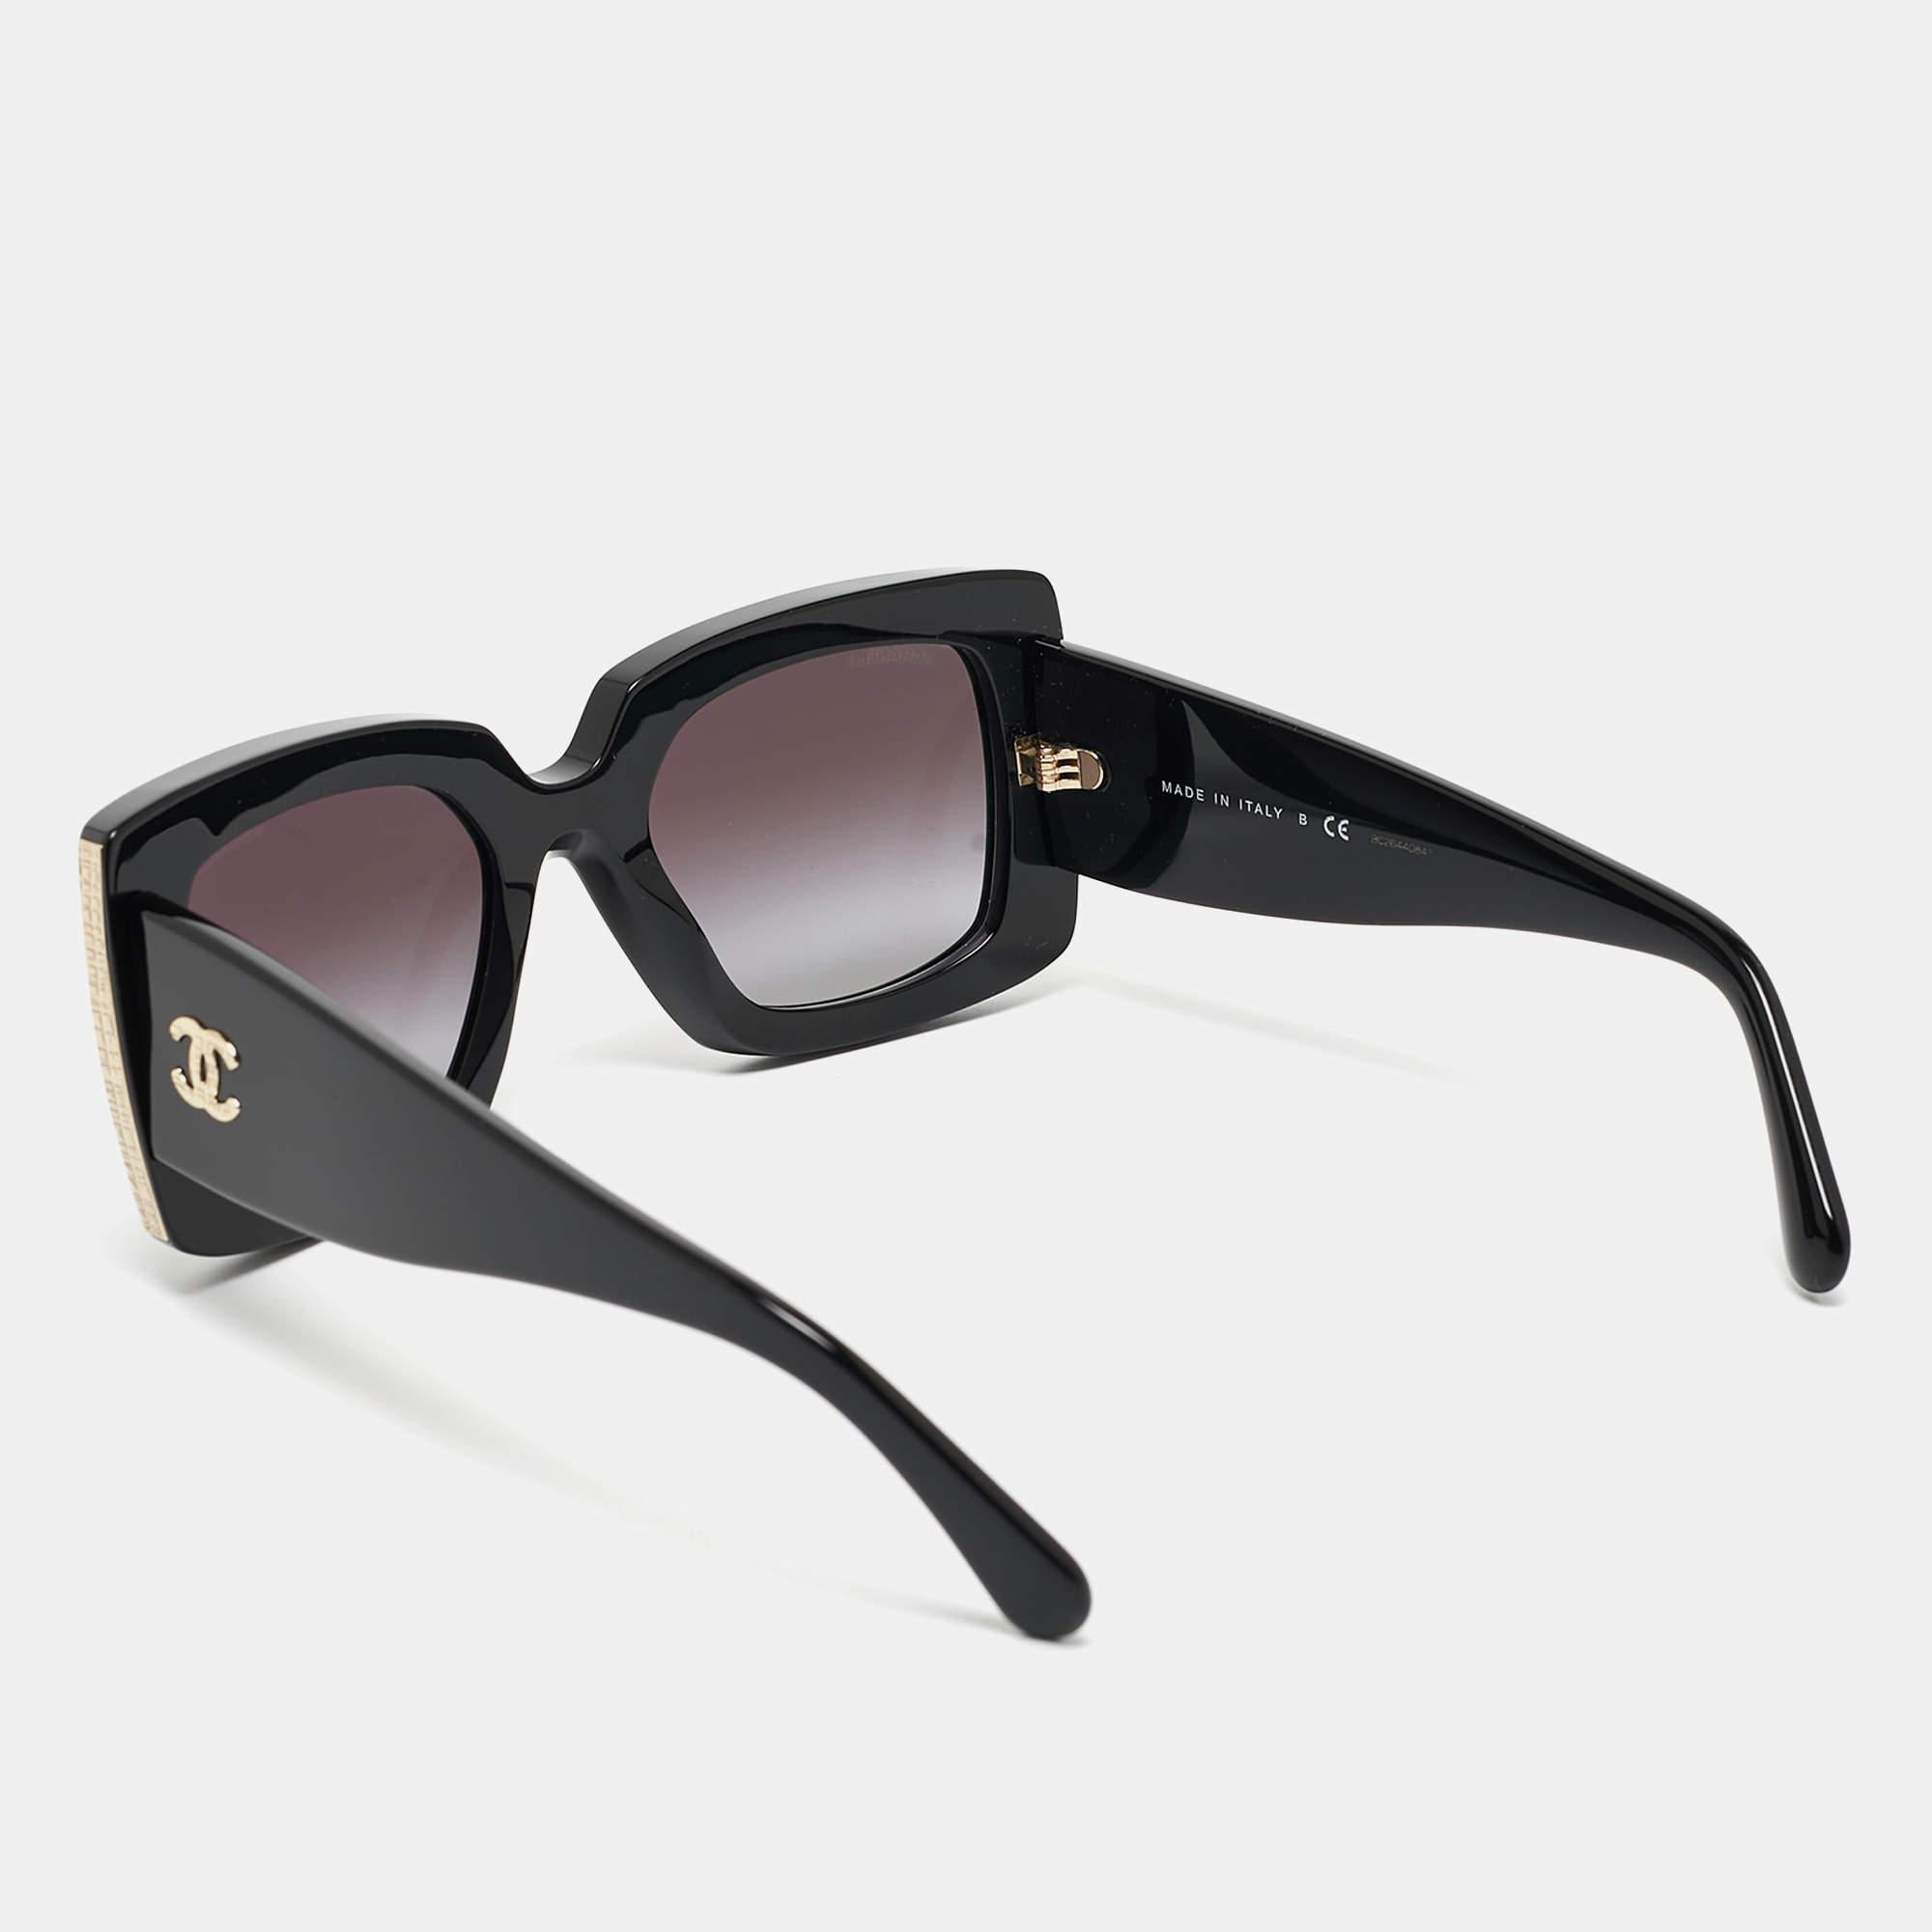 This pair of Chanel sunglasses is expertly crafted for women with high taste in fashion. A perfect companion for sunny day outings, it exhibits gold-tone hardware and branded temples.

